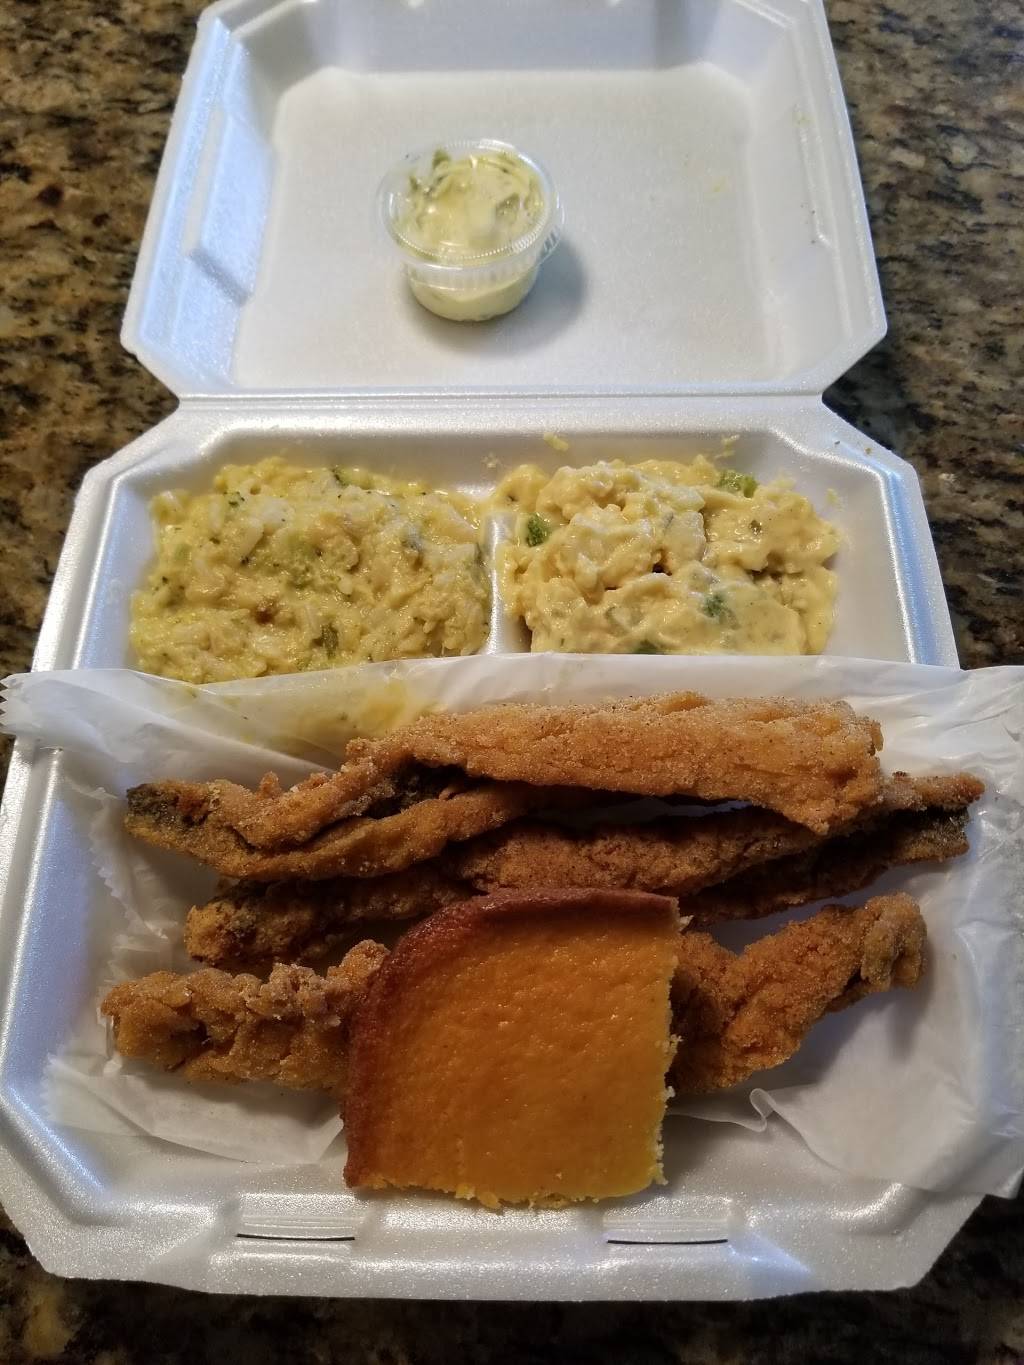 The Waltons Home Cooking & Catering | 1774 Panola Rd, Ellenwood, GA 30294, USA | Phone: (470) 275-5595